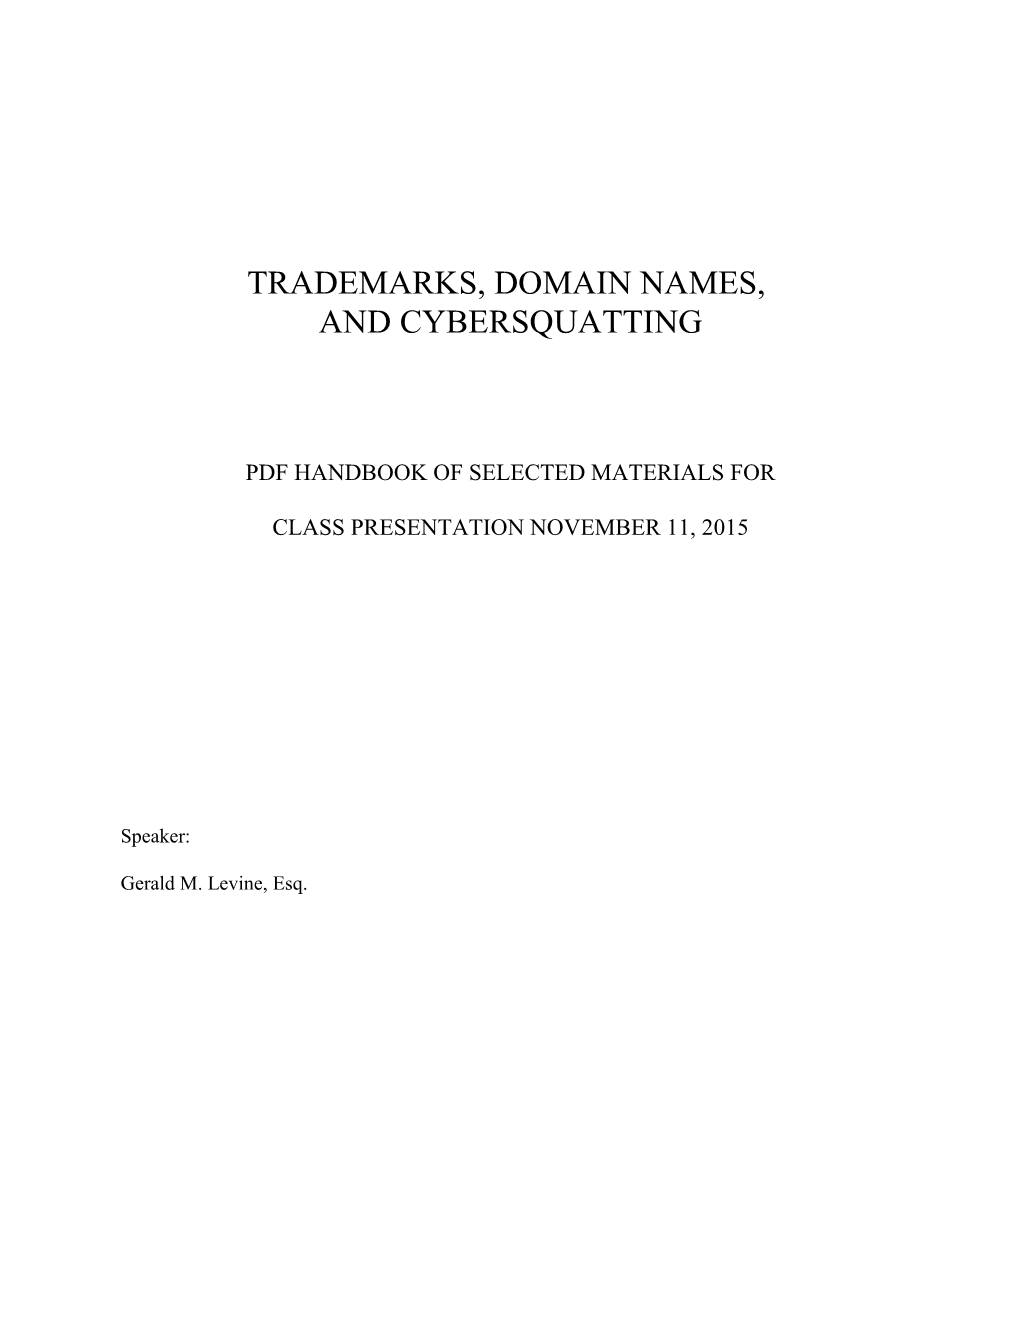 Trademarks, Domain Names, and Cybersquatting